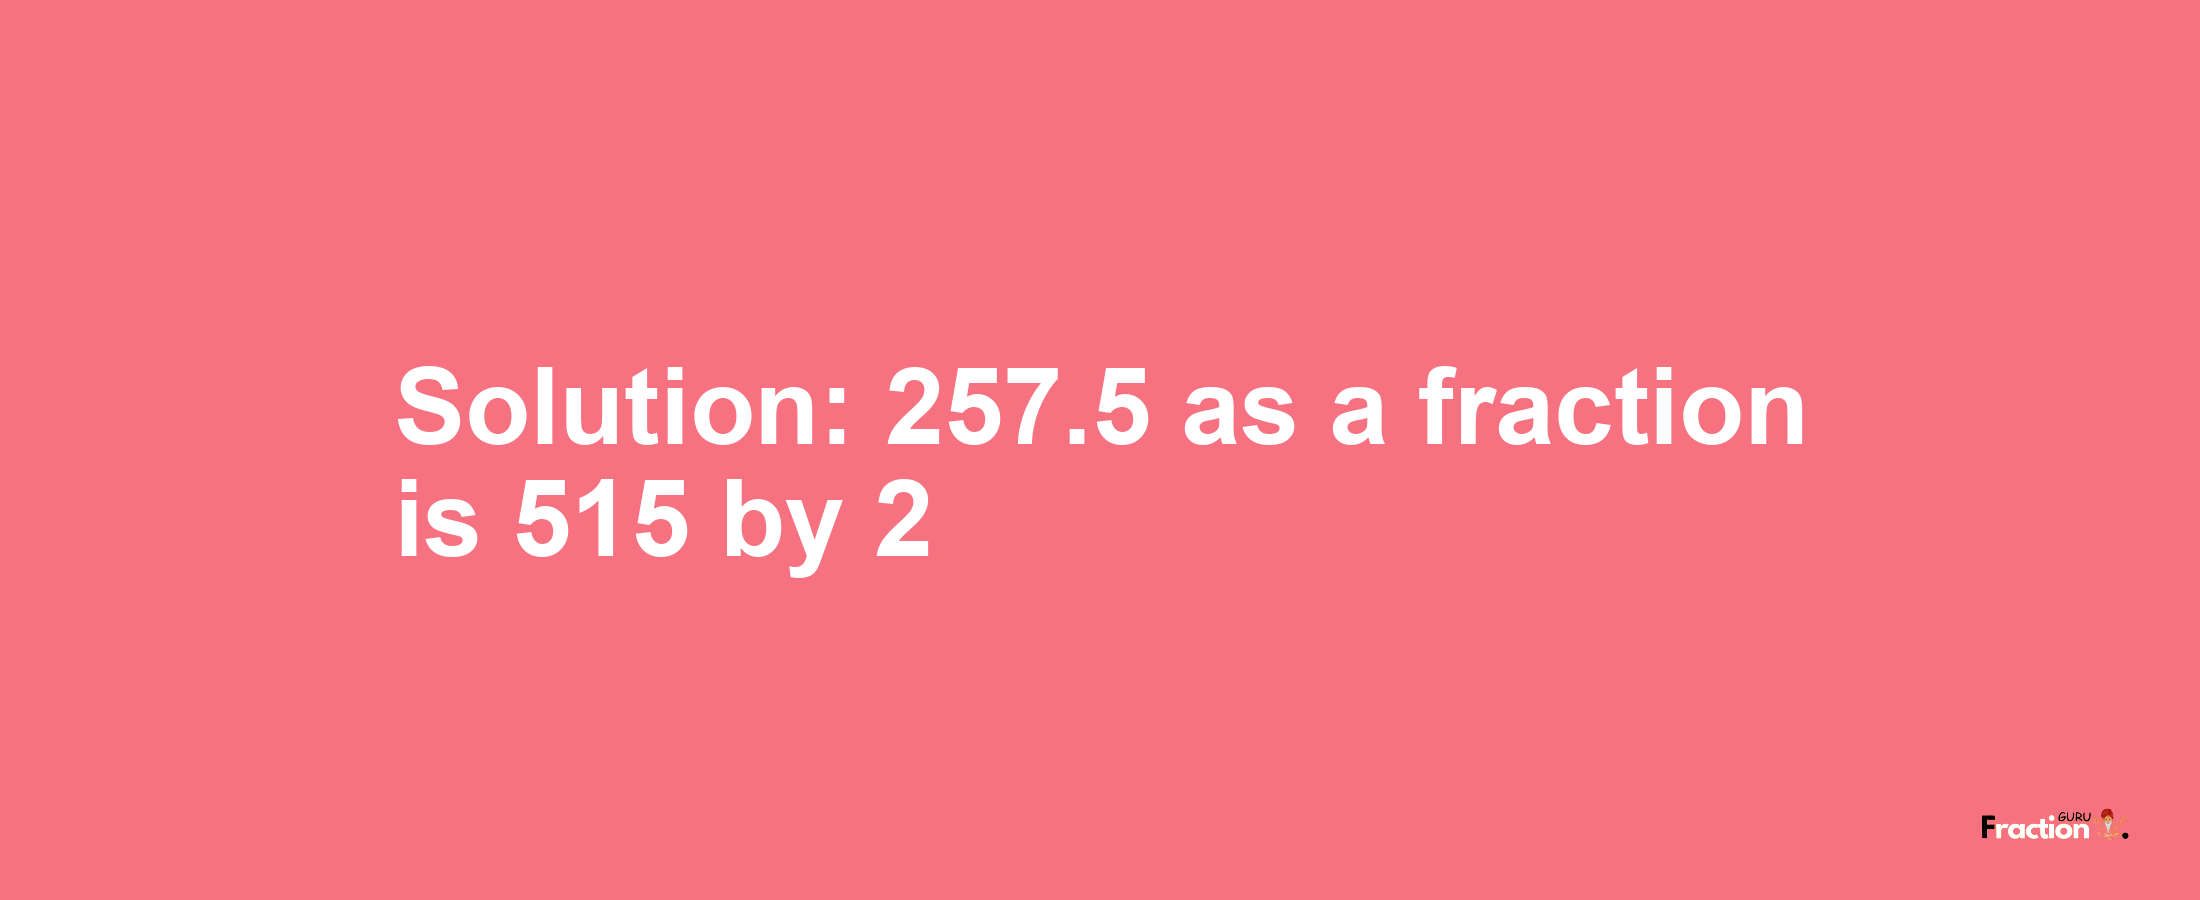 Solution:257.5 as a fraction is 515/2